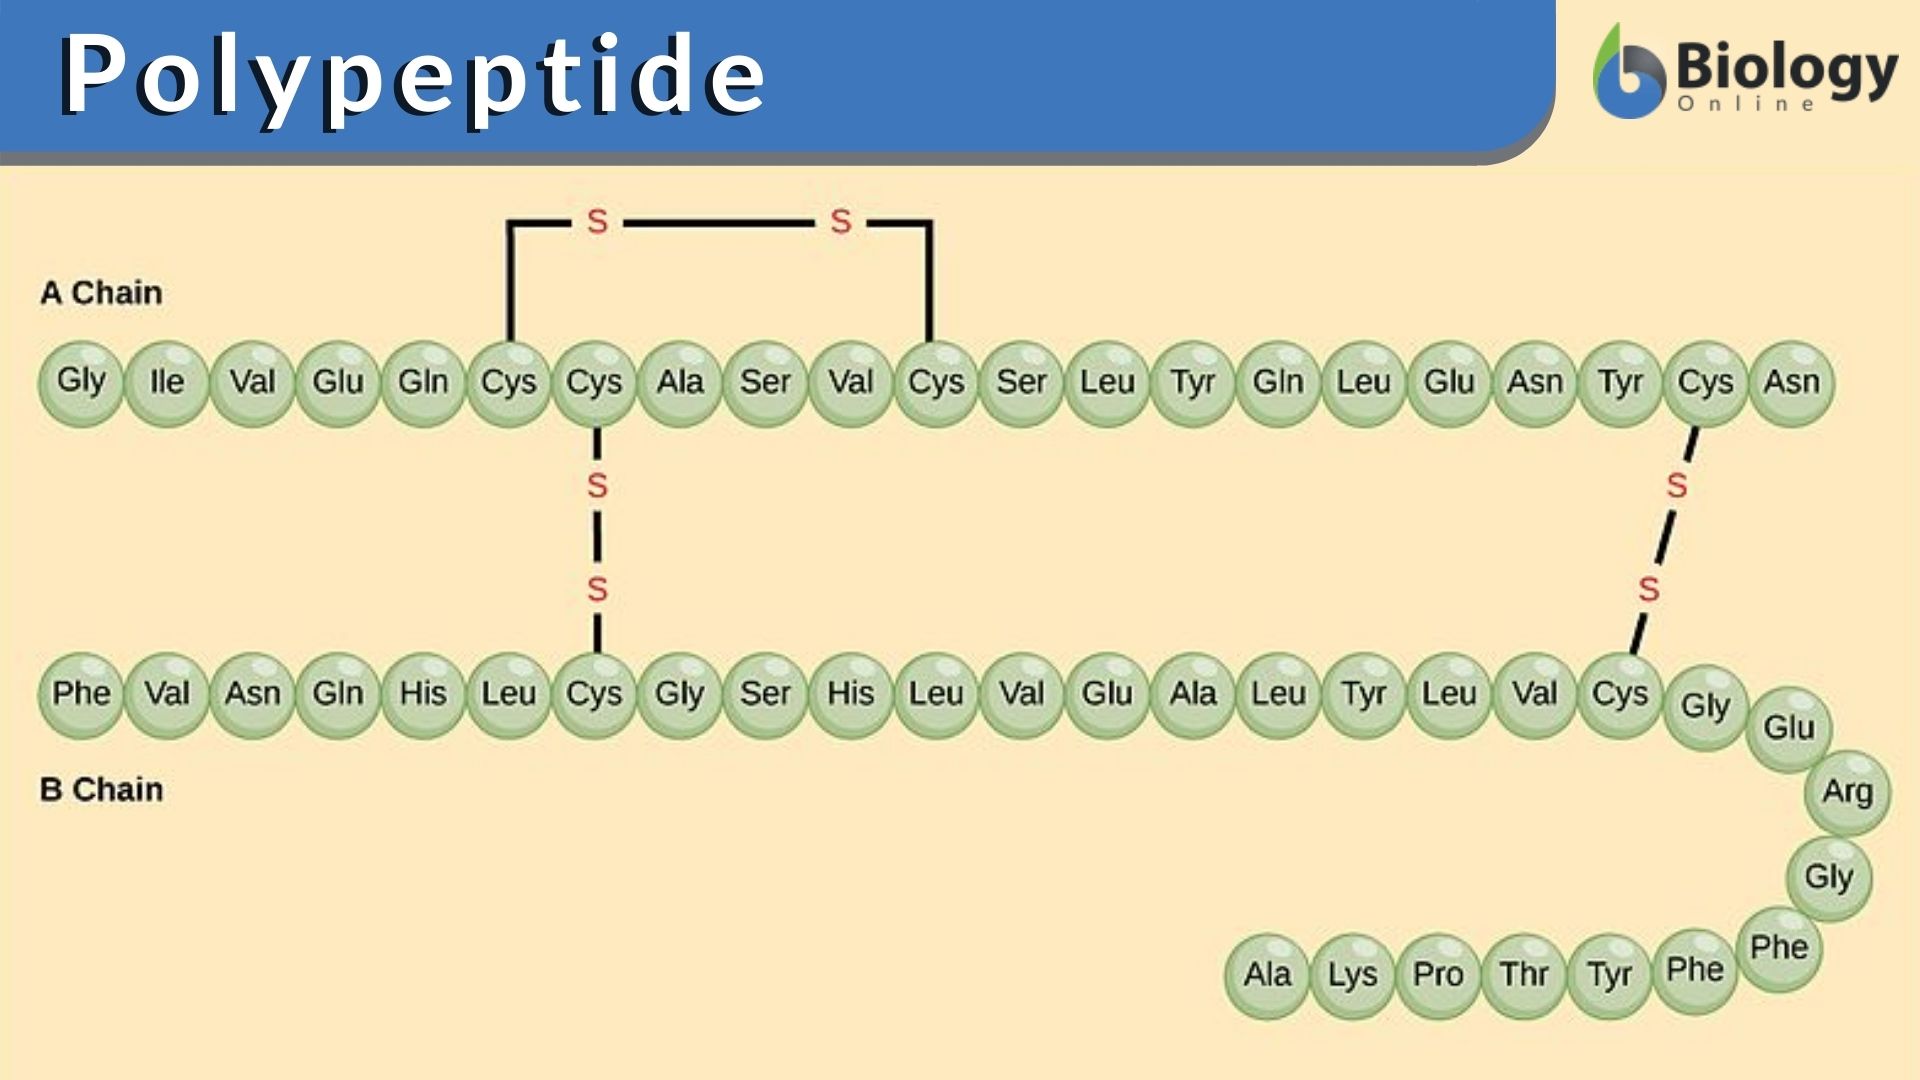 Polypeptide Definition and Examples - Biology Online Dictionary